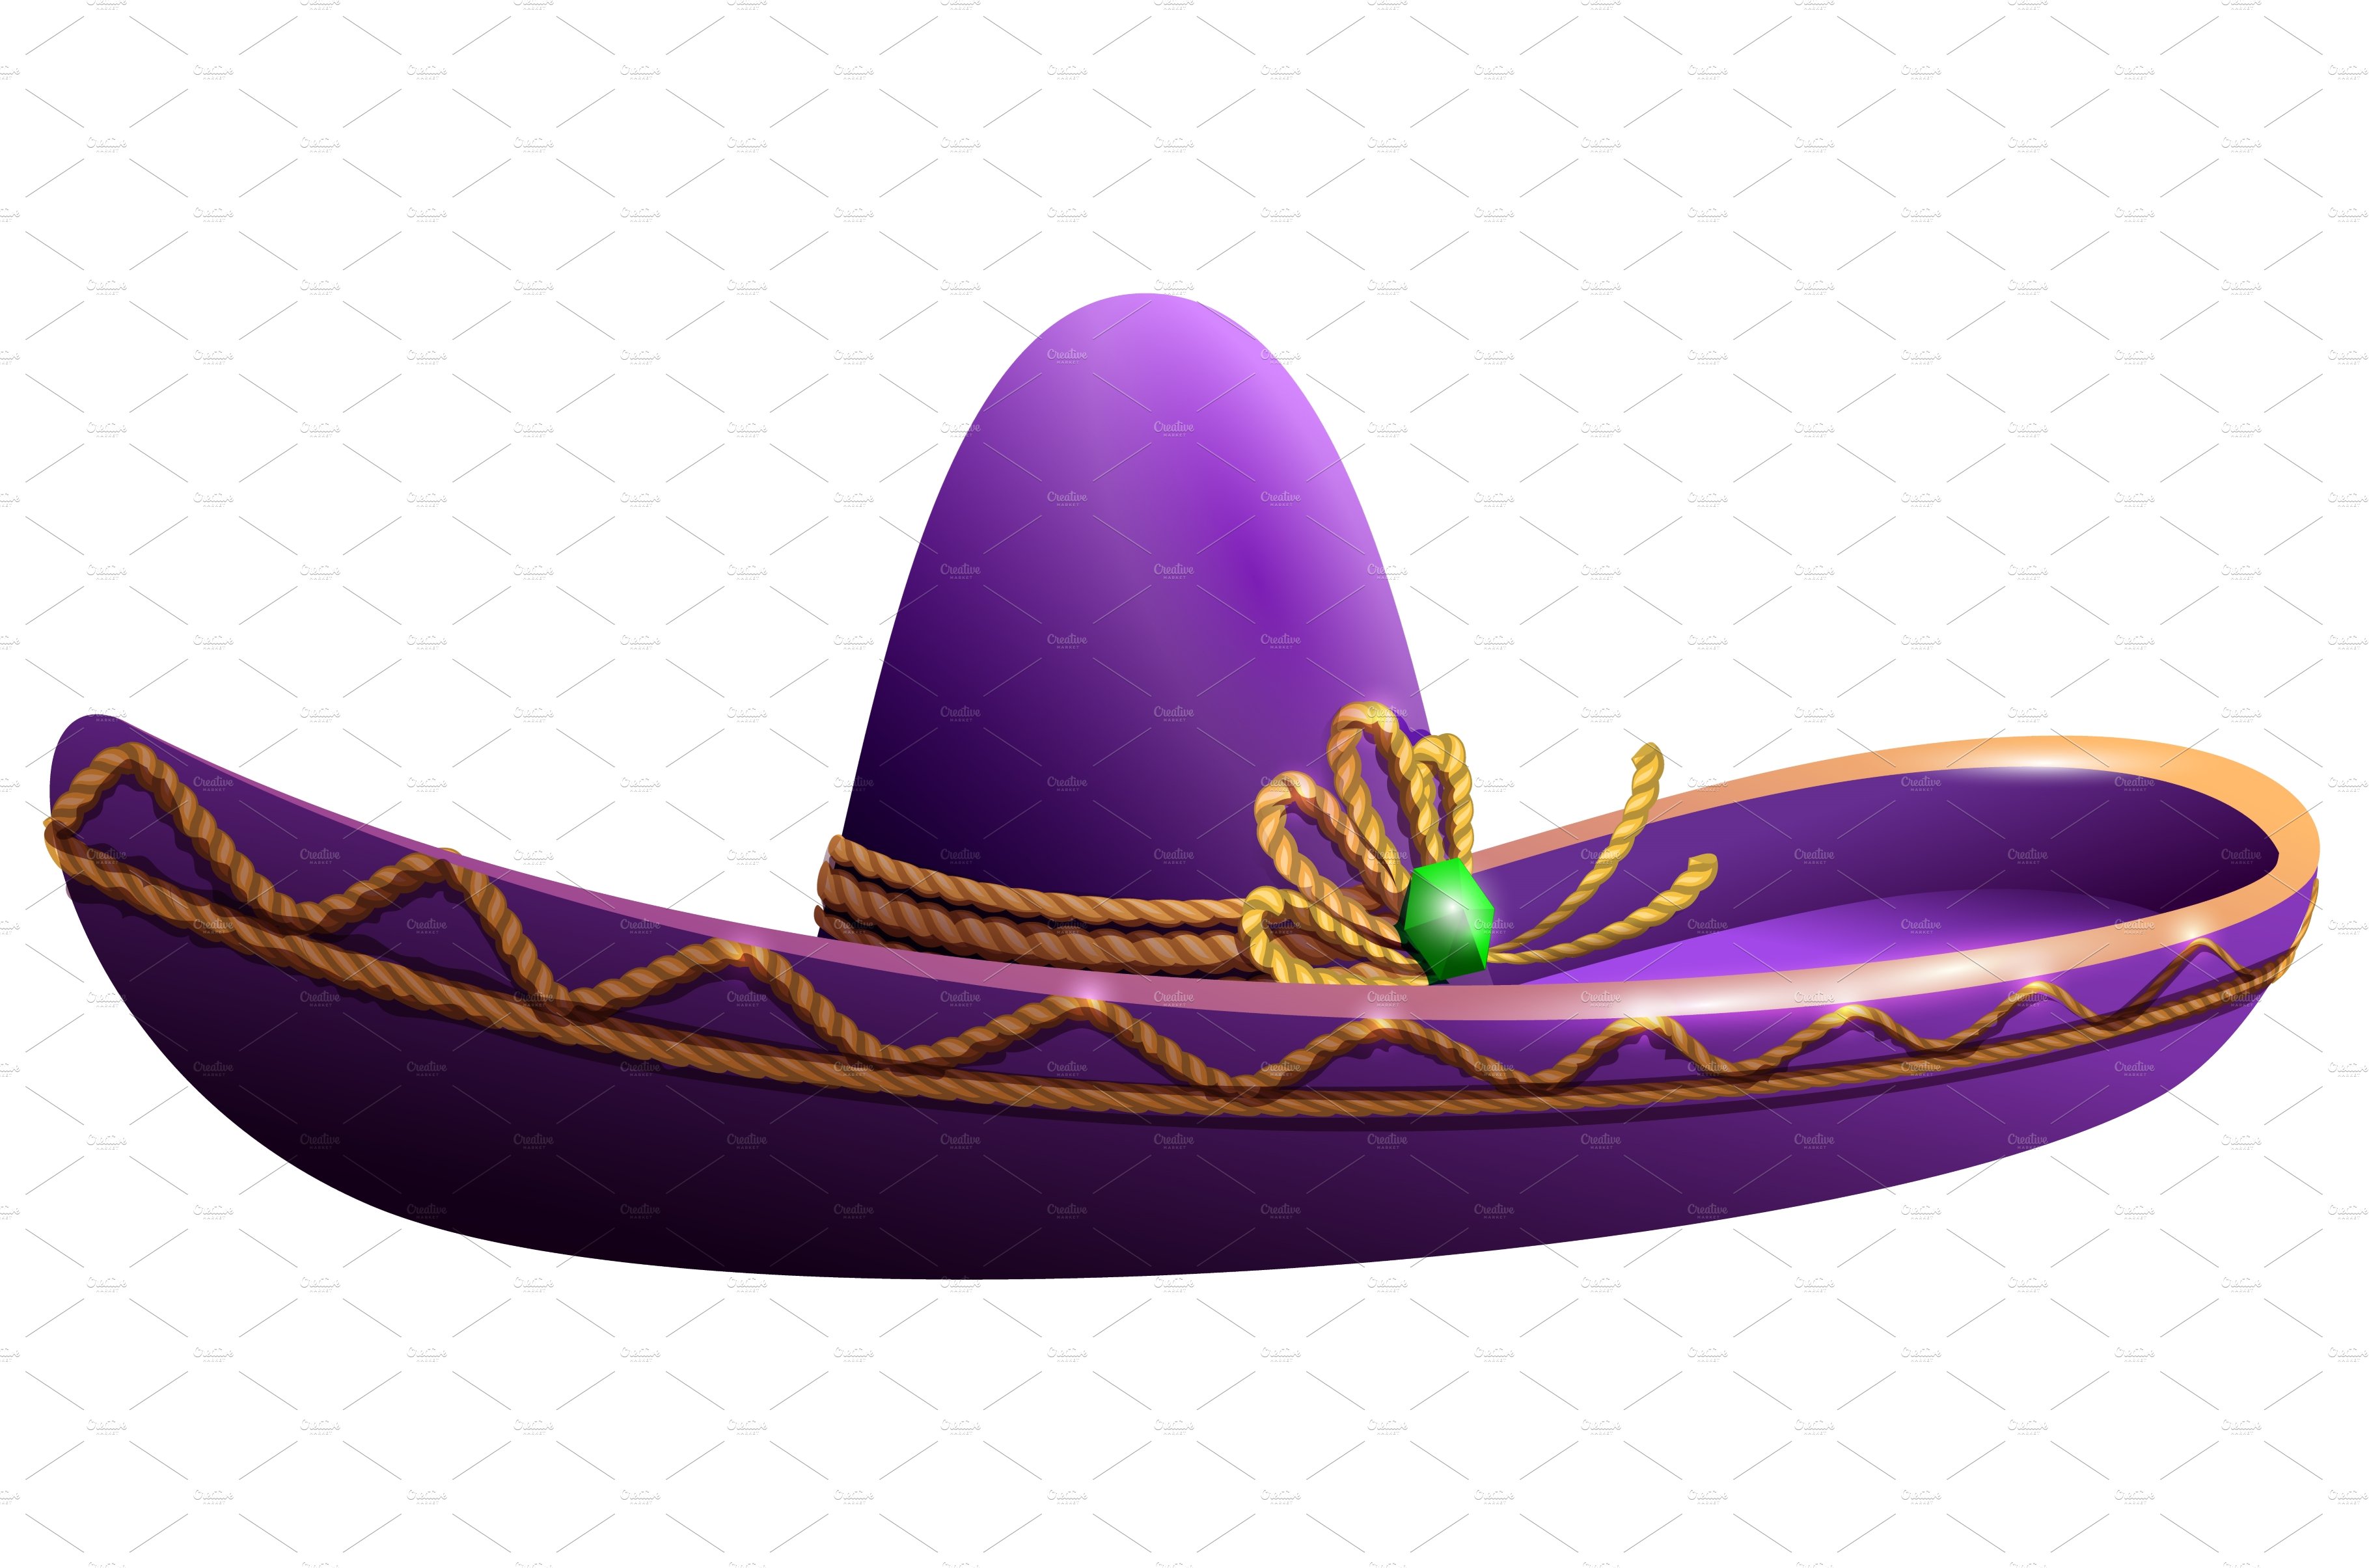 Sombrero Mexican national hat for cover image.